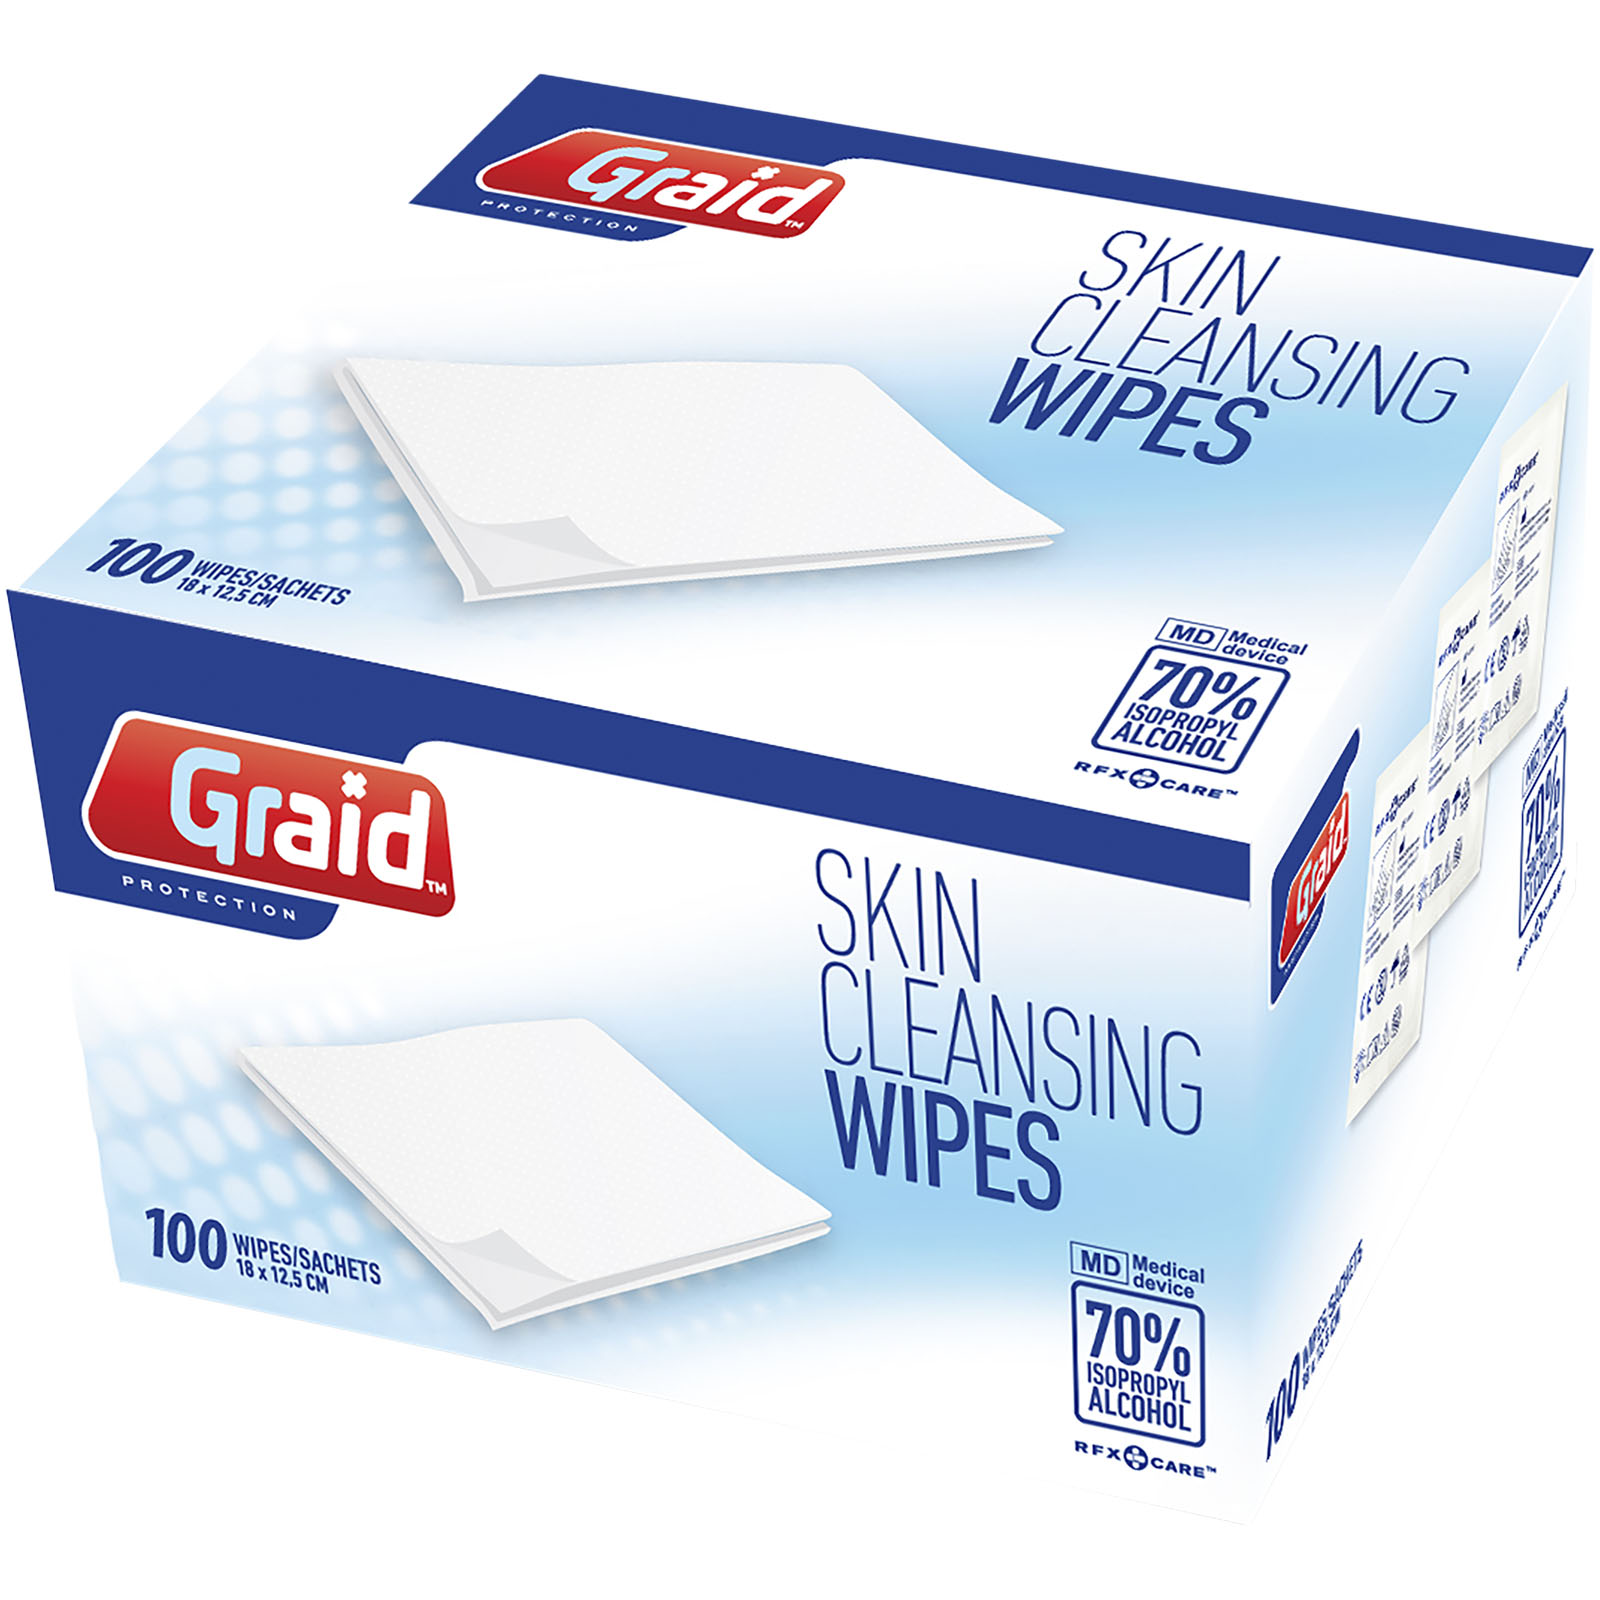 Advertising Protection - Elisabeth cleansing wipes - 1